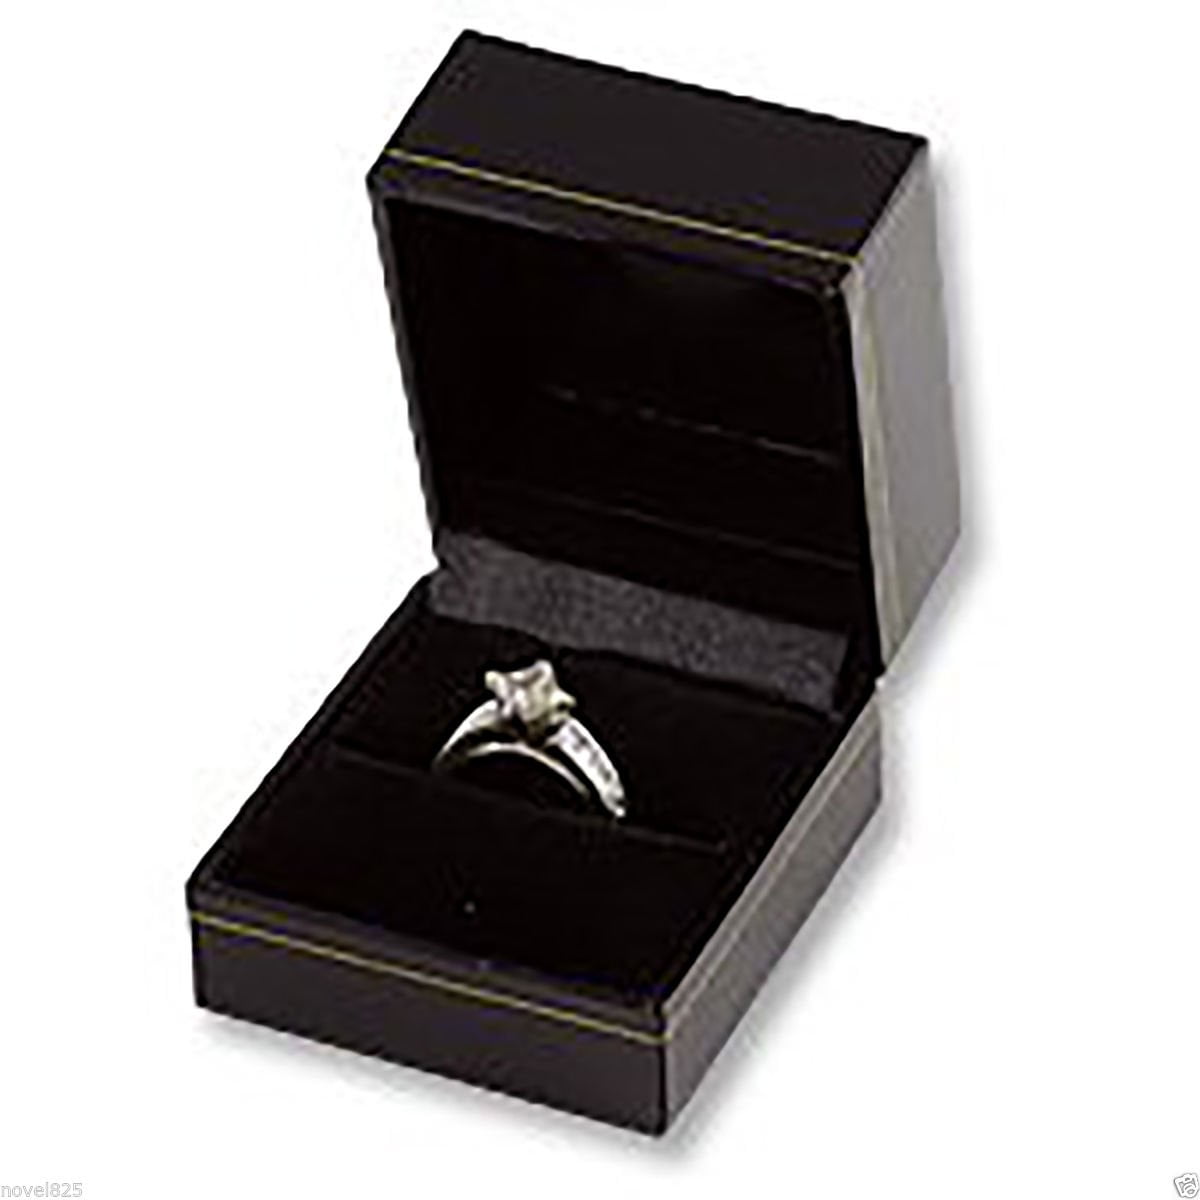 Tiffany & Co Black Suede Presentation Engagement Ring Box & outer Box -  New! | eBay